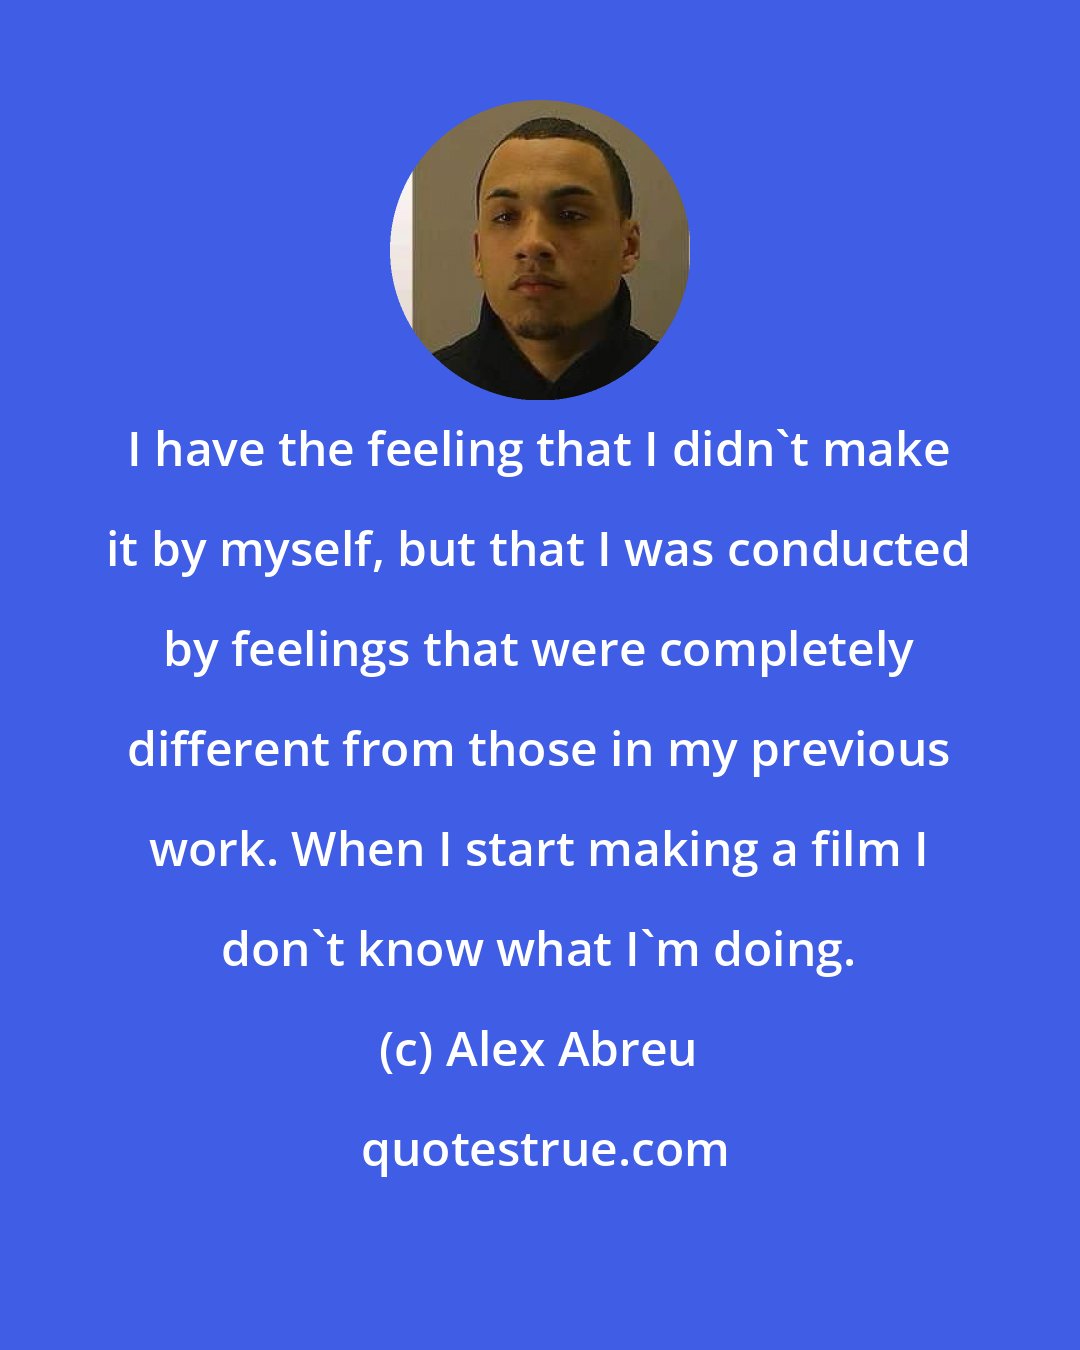 Alex Abreu: I have the feeling that I didn't make it by myself, but that I was conducted by feelings that were completely different from those in my previous work. When I start making a film I don't know what I'm doing.